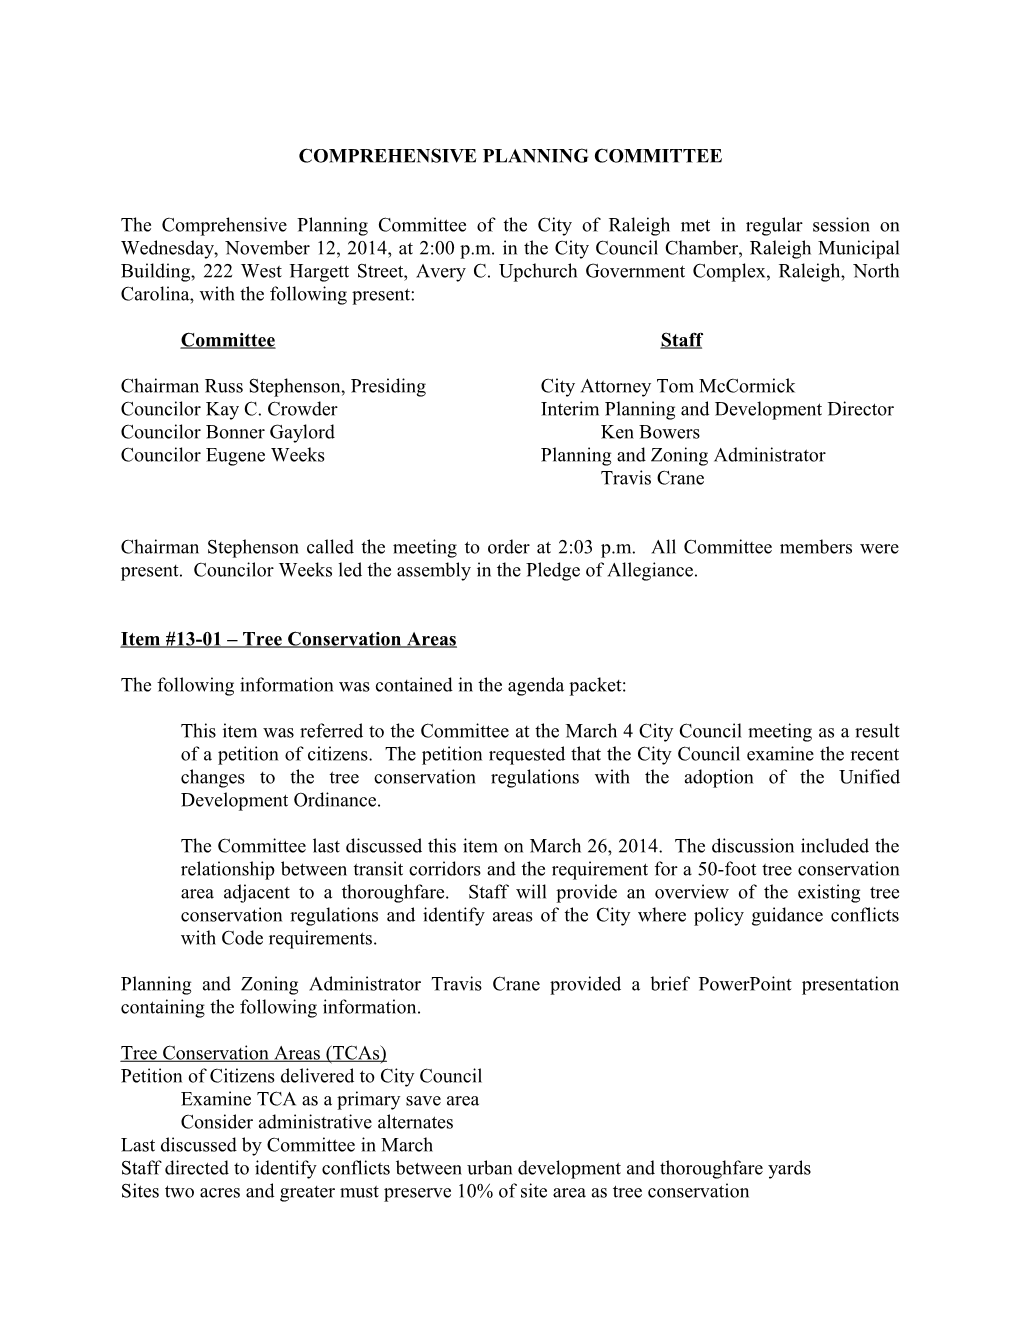 Comprehensive Planning Committee Minutes - 11/12/2014